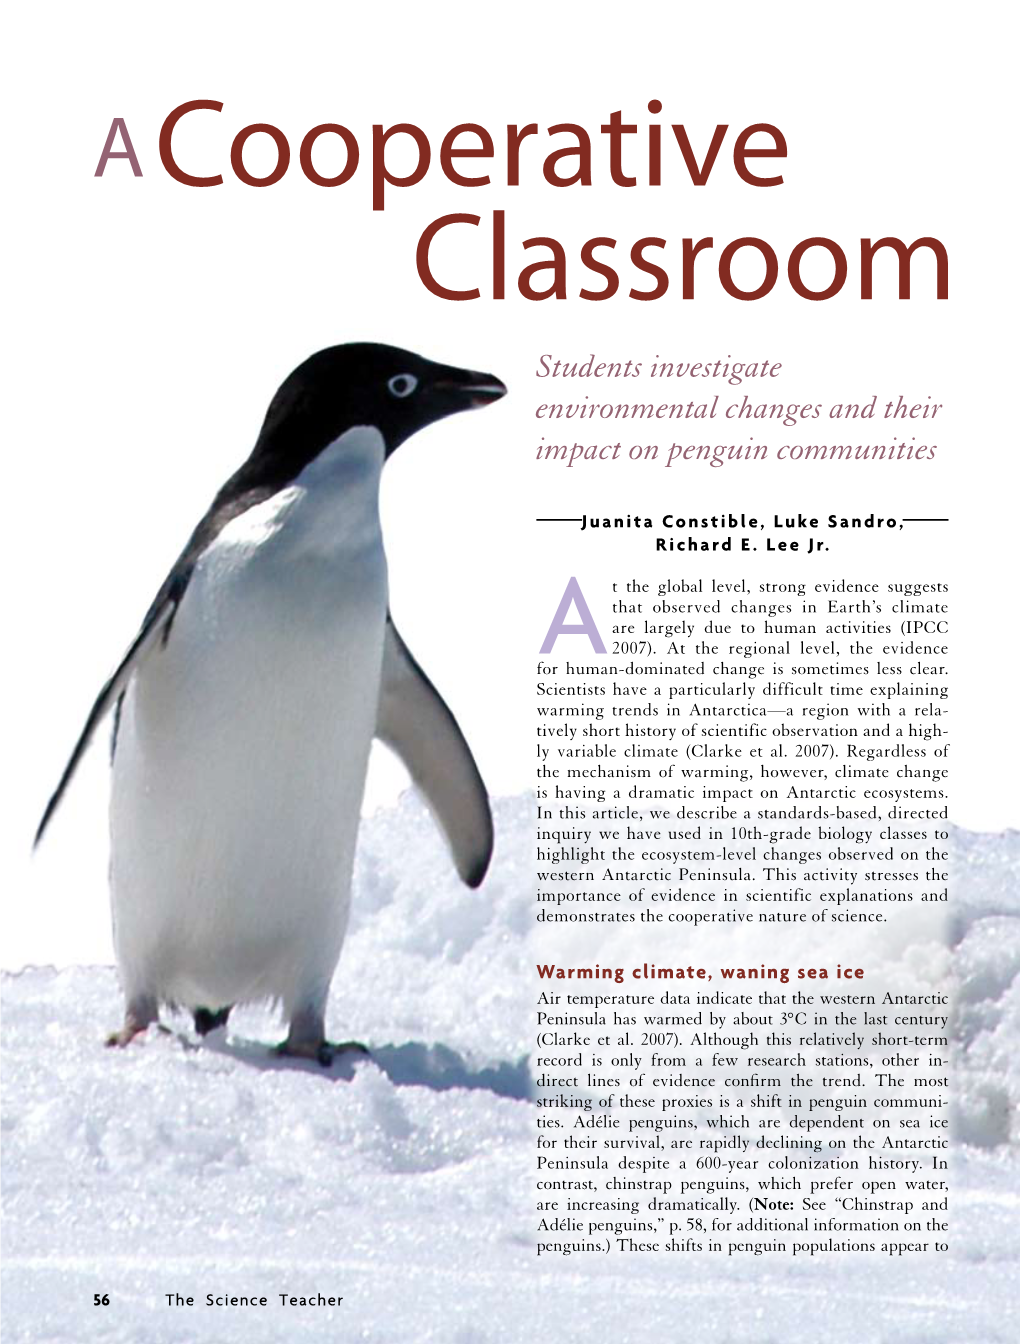 Students Investigate Environmental Changes and Their Impact on Penguin Communities